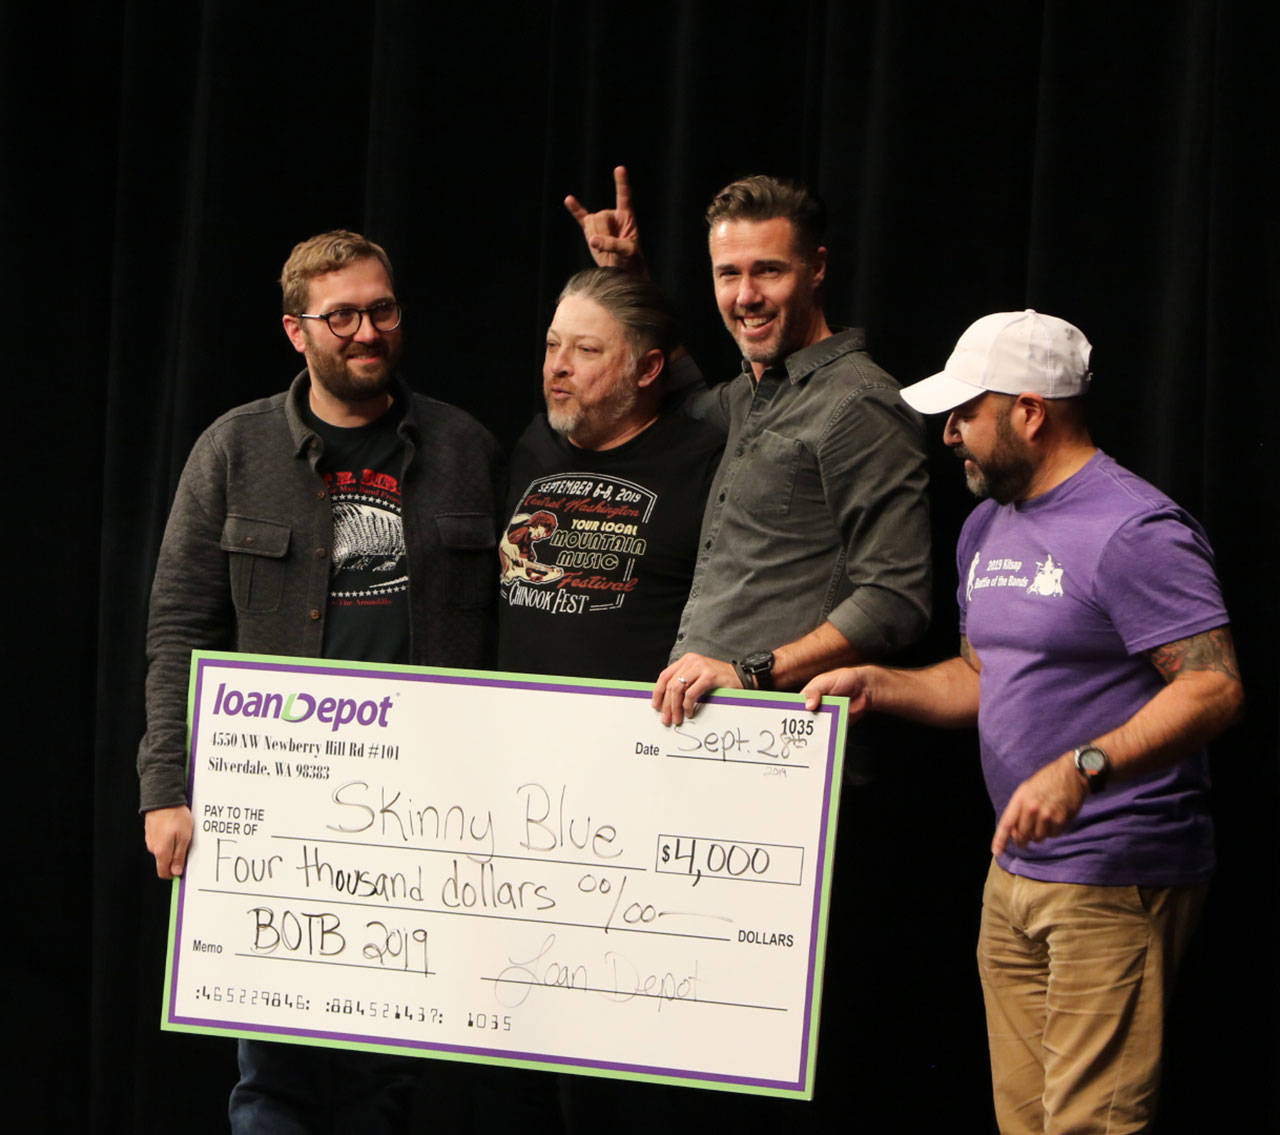 Skinny Blue took home $4, 000 as the winners of the competition. (l-r) Collin Ray, Kevin Blackwood, Thys Wallwork, and Frank Portello.